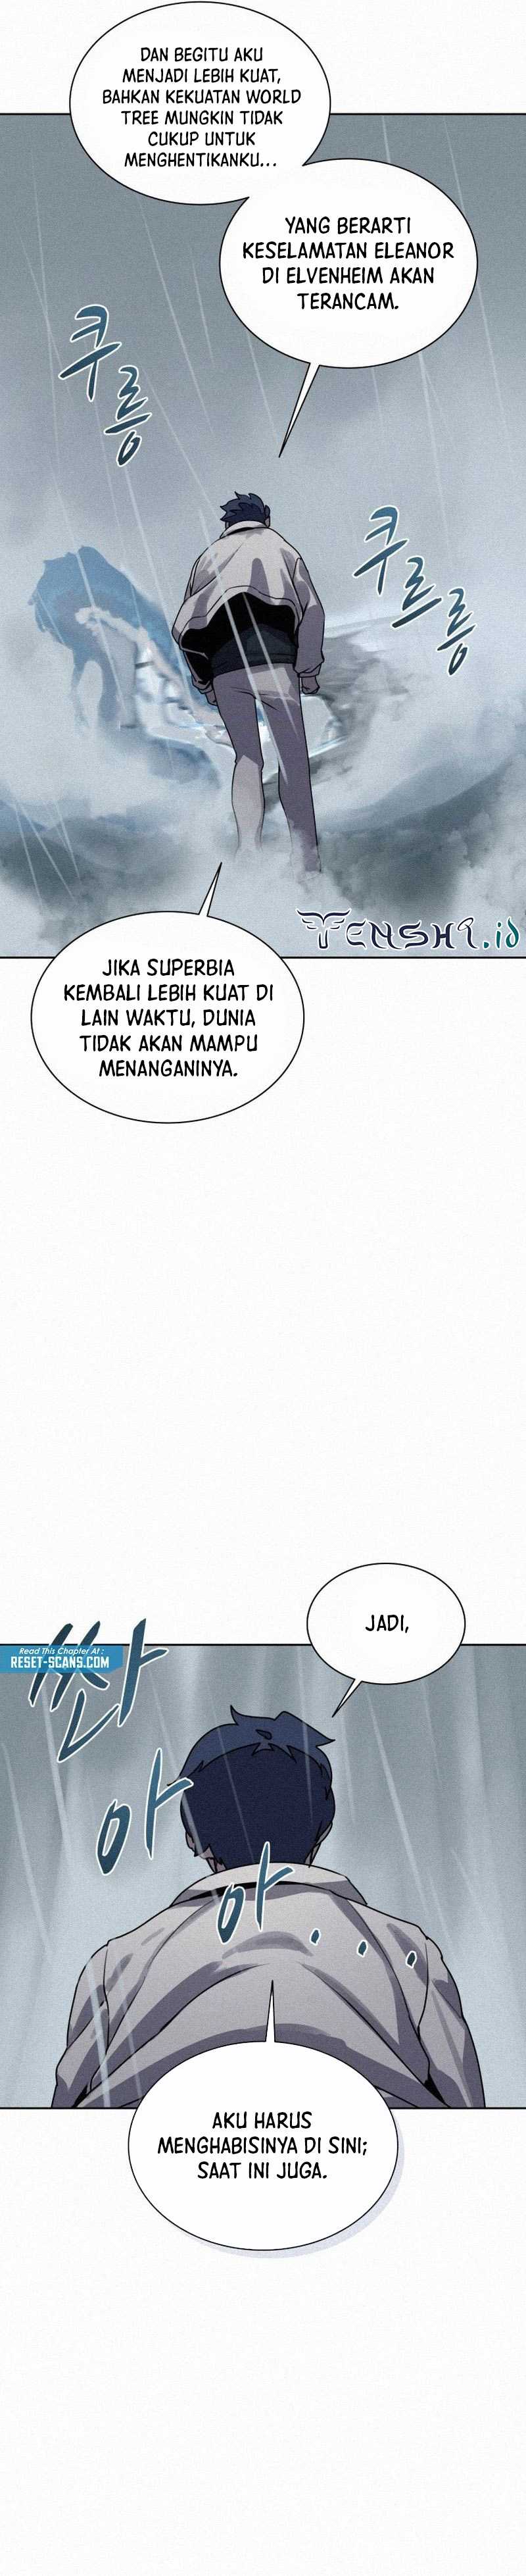 The Book Eating Magician (Book Eater) Chapter 109